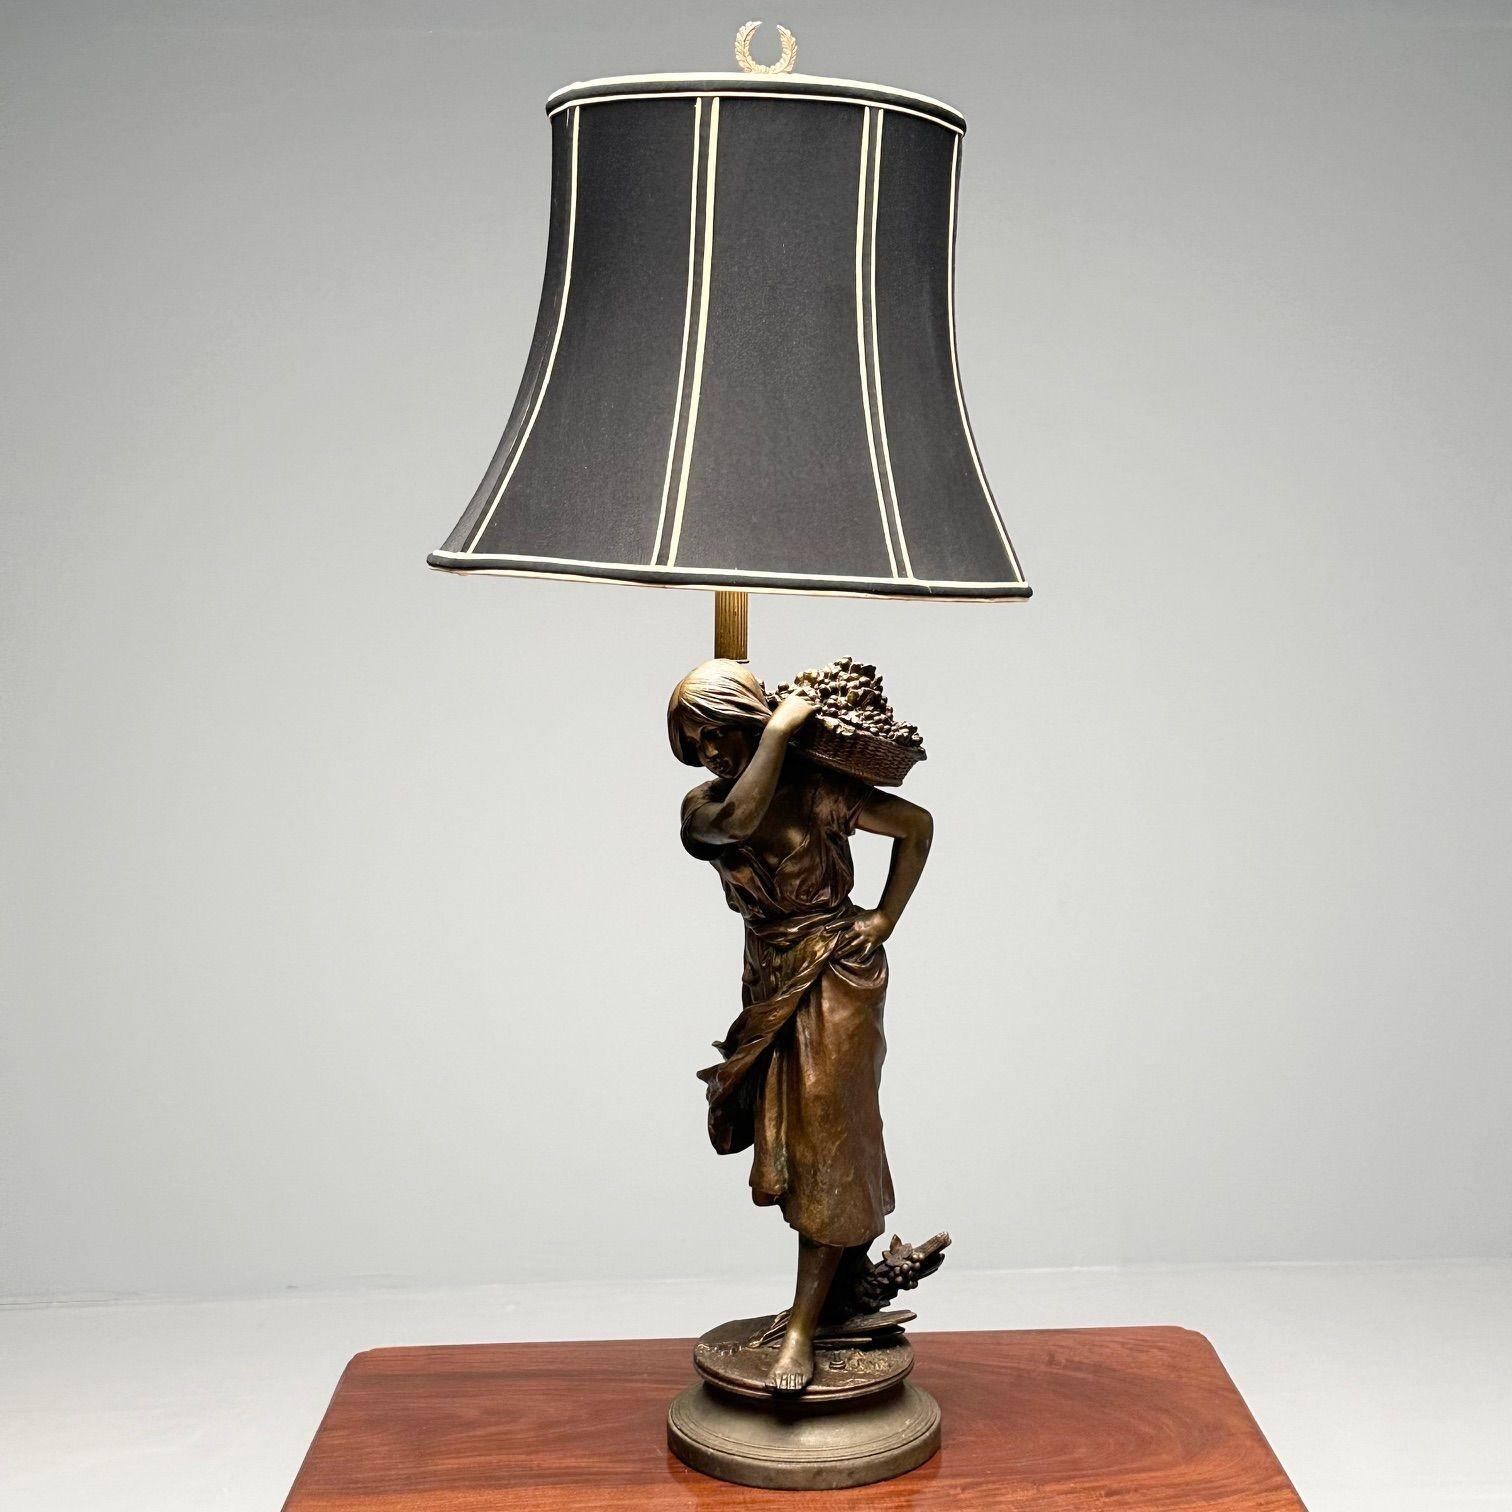 Metal Statue of a Woman Fruit Bearer, Mounted as Lamp, French, 1930s

A finely detailed statue of a gilt metal fruit bearer in full dress, signed.

42.5 H x 18 Dia. / Figure Alone: 21.5 x 8W x 8D